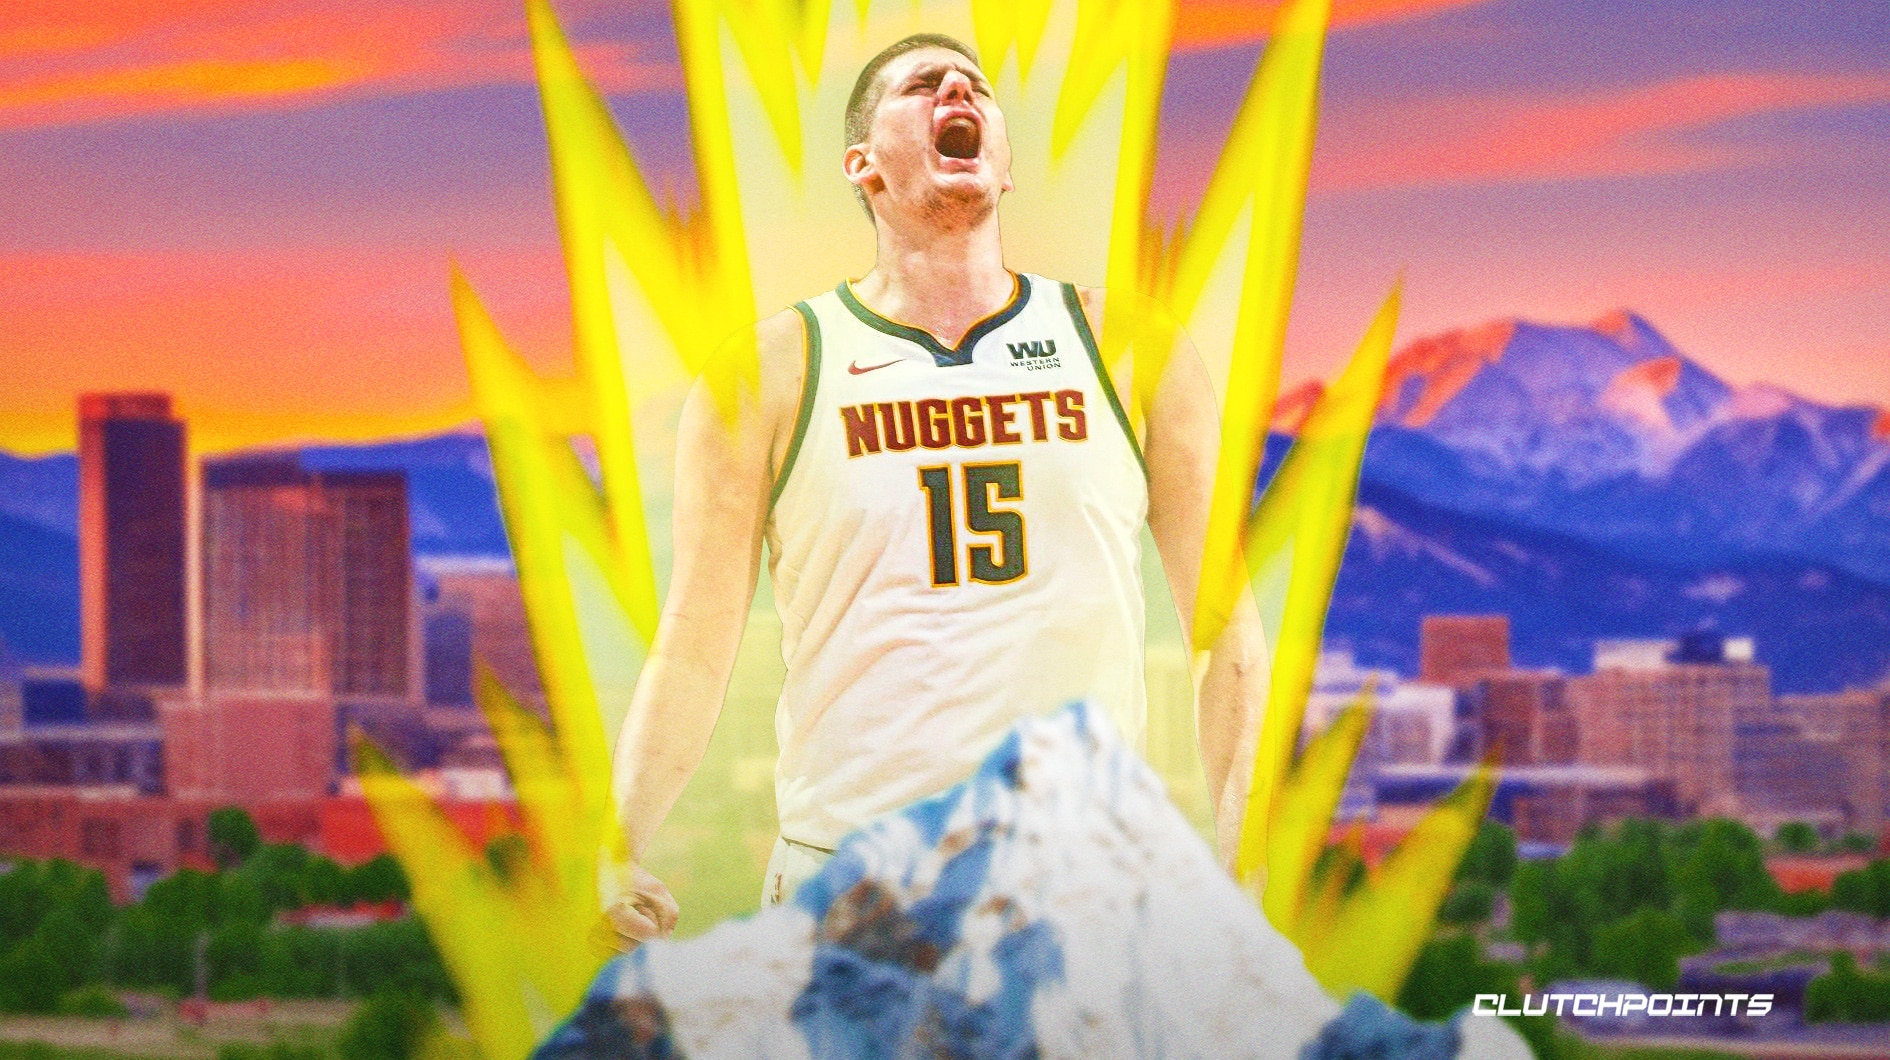 Nuggets Nikola Jokic on a playoff heater never seen in NBA history